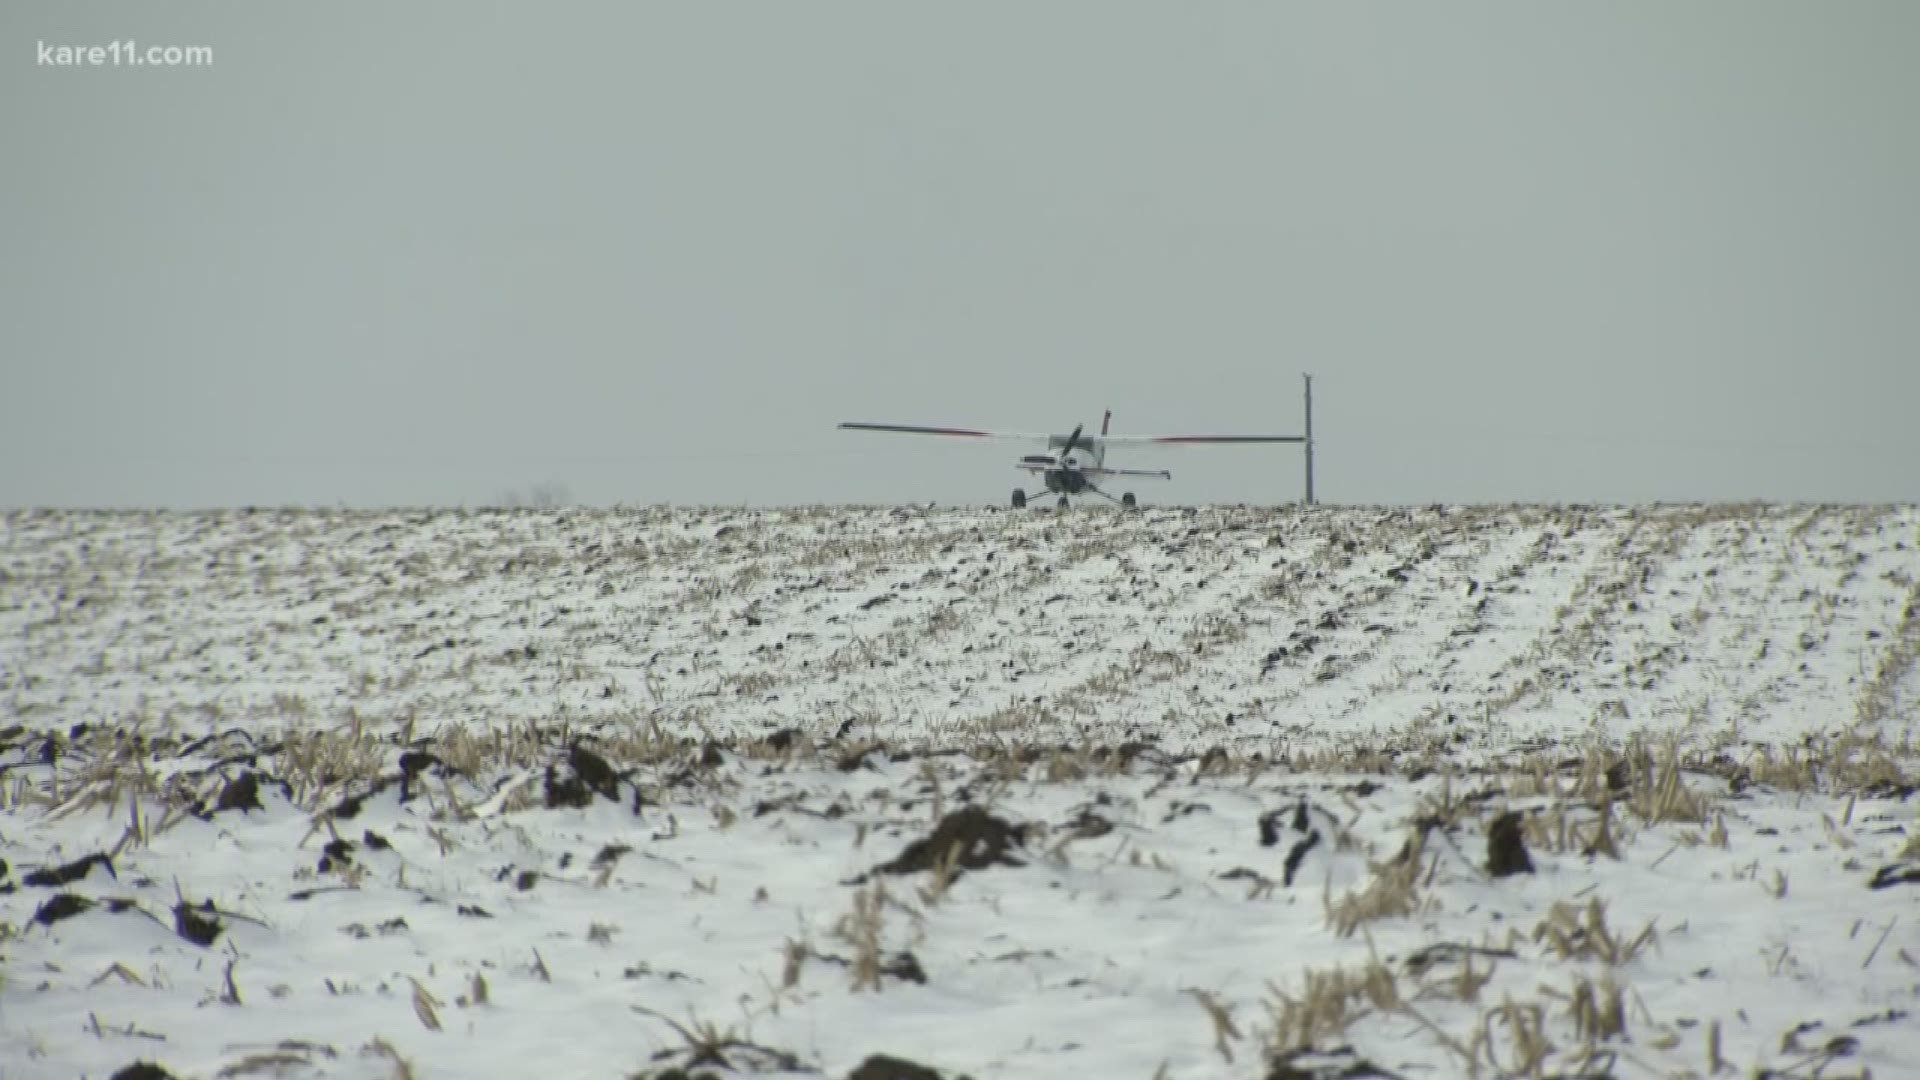 Dakota County Sheriff Captain Rick Schroeder says dispatchers received a call at 11:06 a.m. of a plane down short of the Airlake Airport in Lakeville. The pilot reported the plane suffered engine failure.